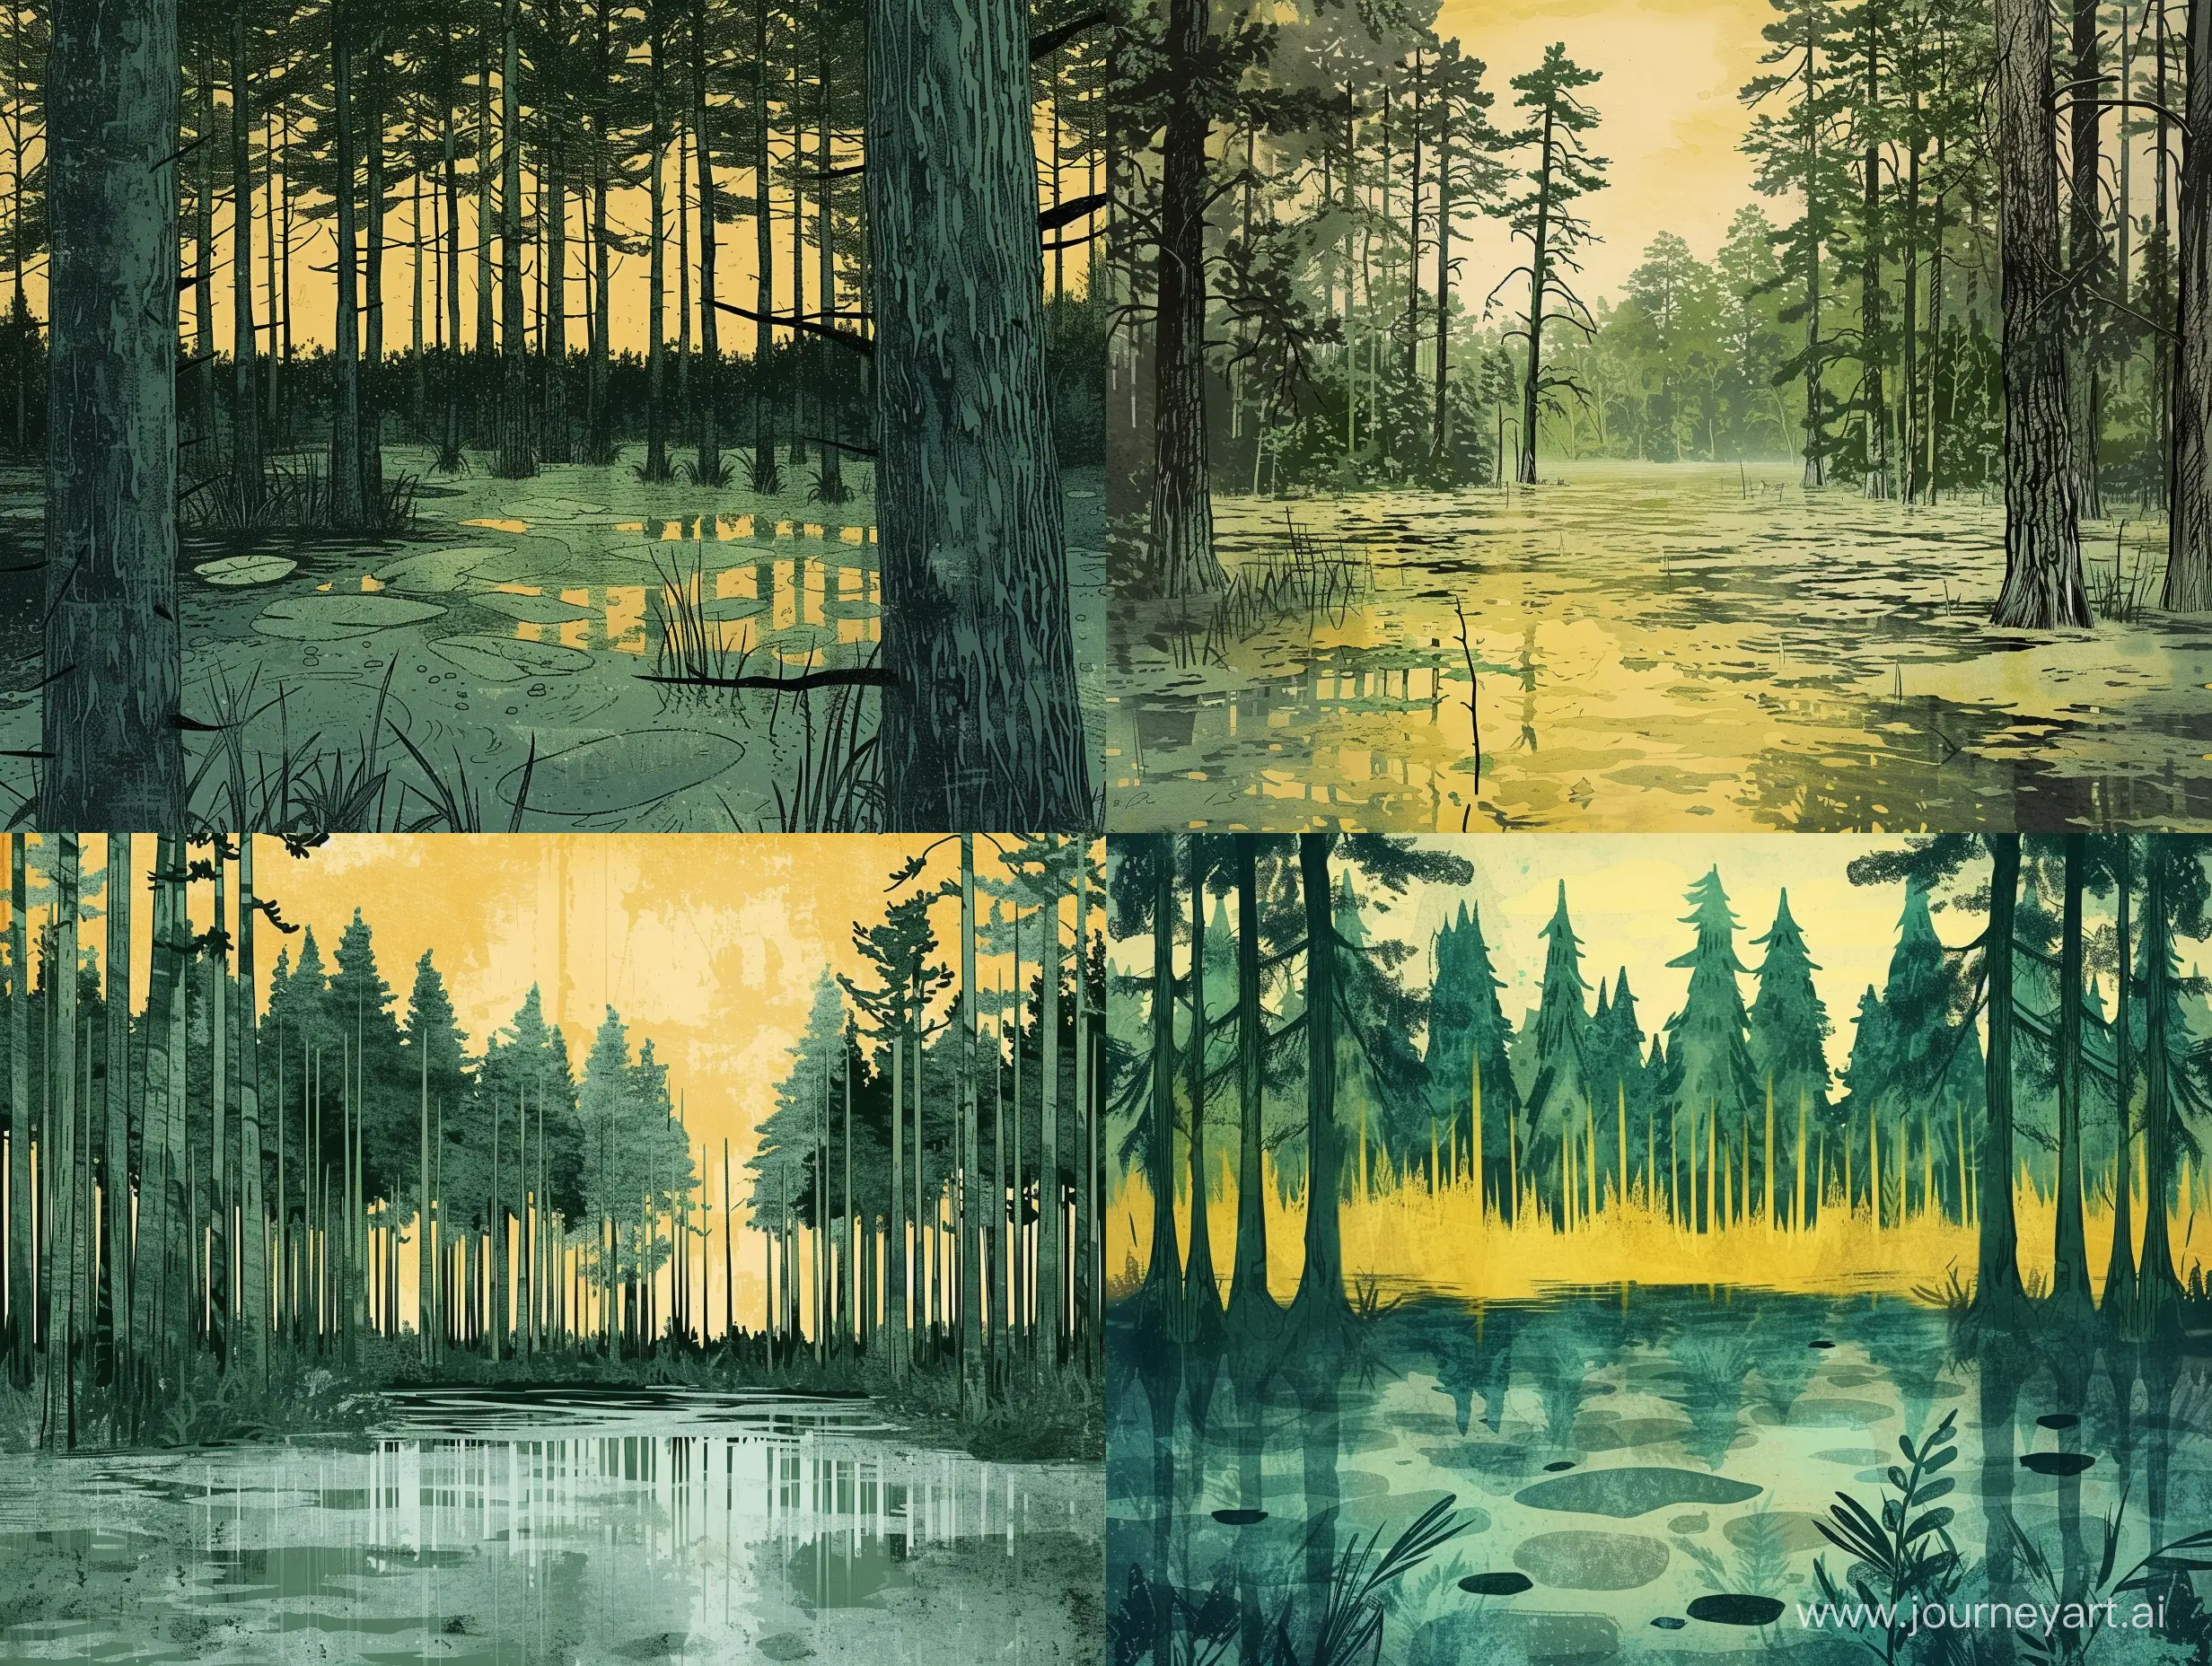 Enchanting-Pine-Forest-in-Swamp-Vintage-Illustration-in-SaltDark-Green-and-Yellow